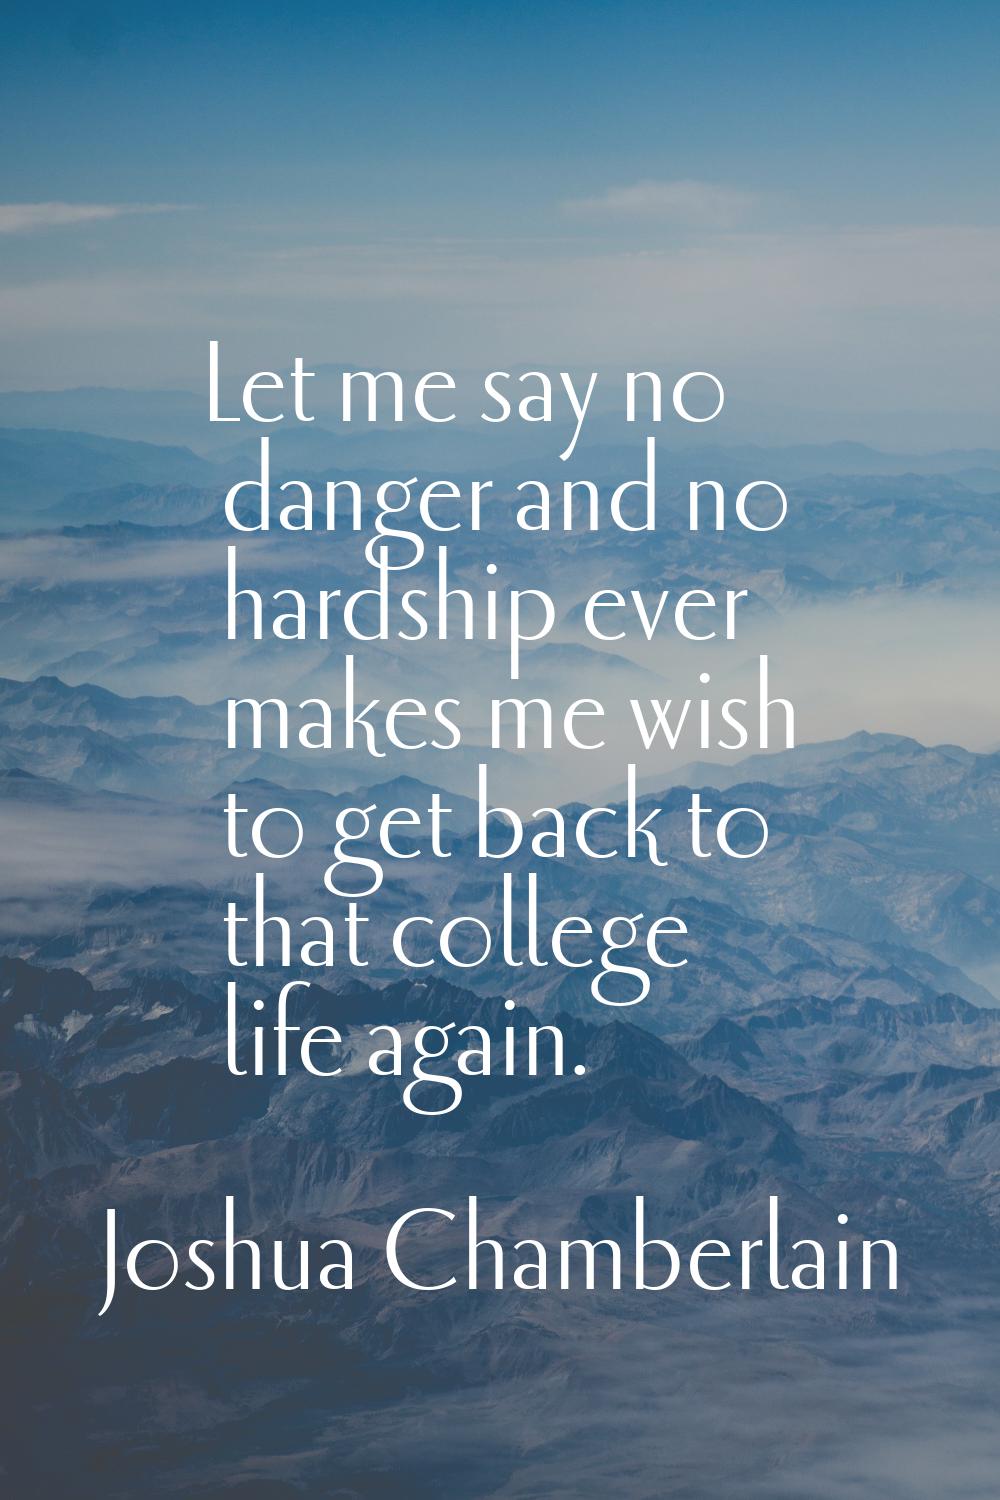 Let me say no danger and no hardship ever makes me wish to get back to that college life again.